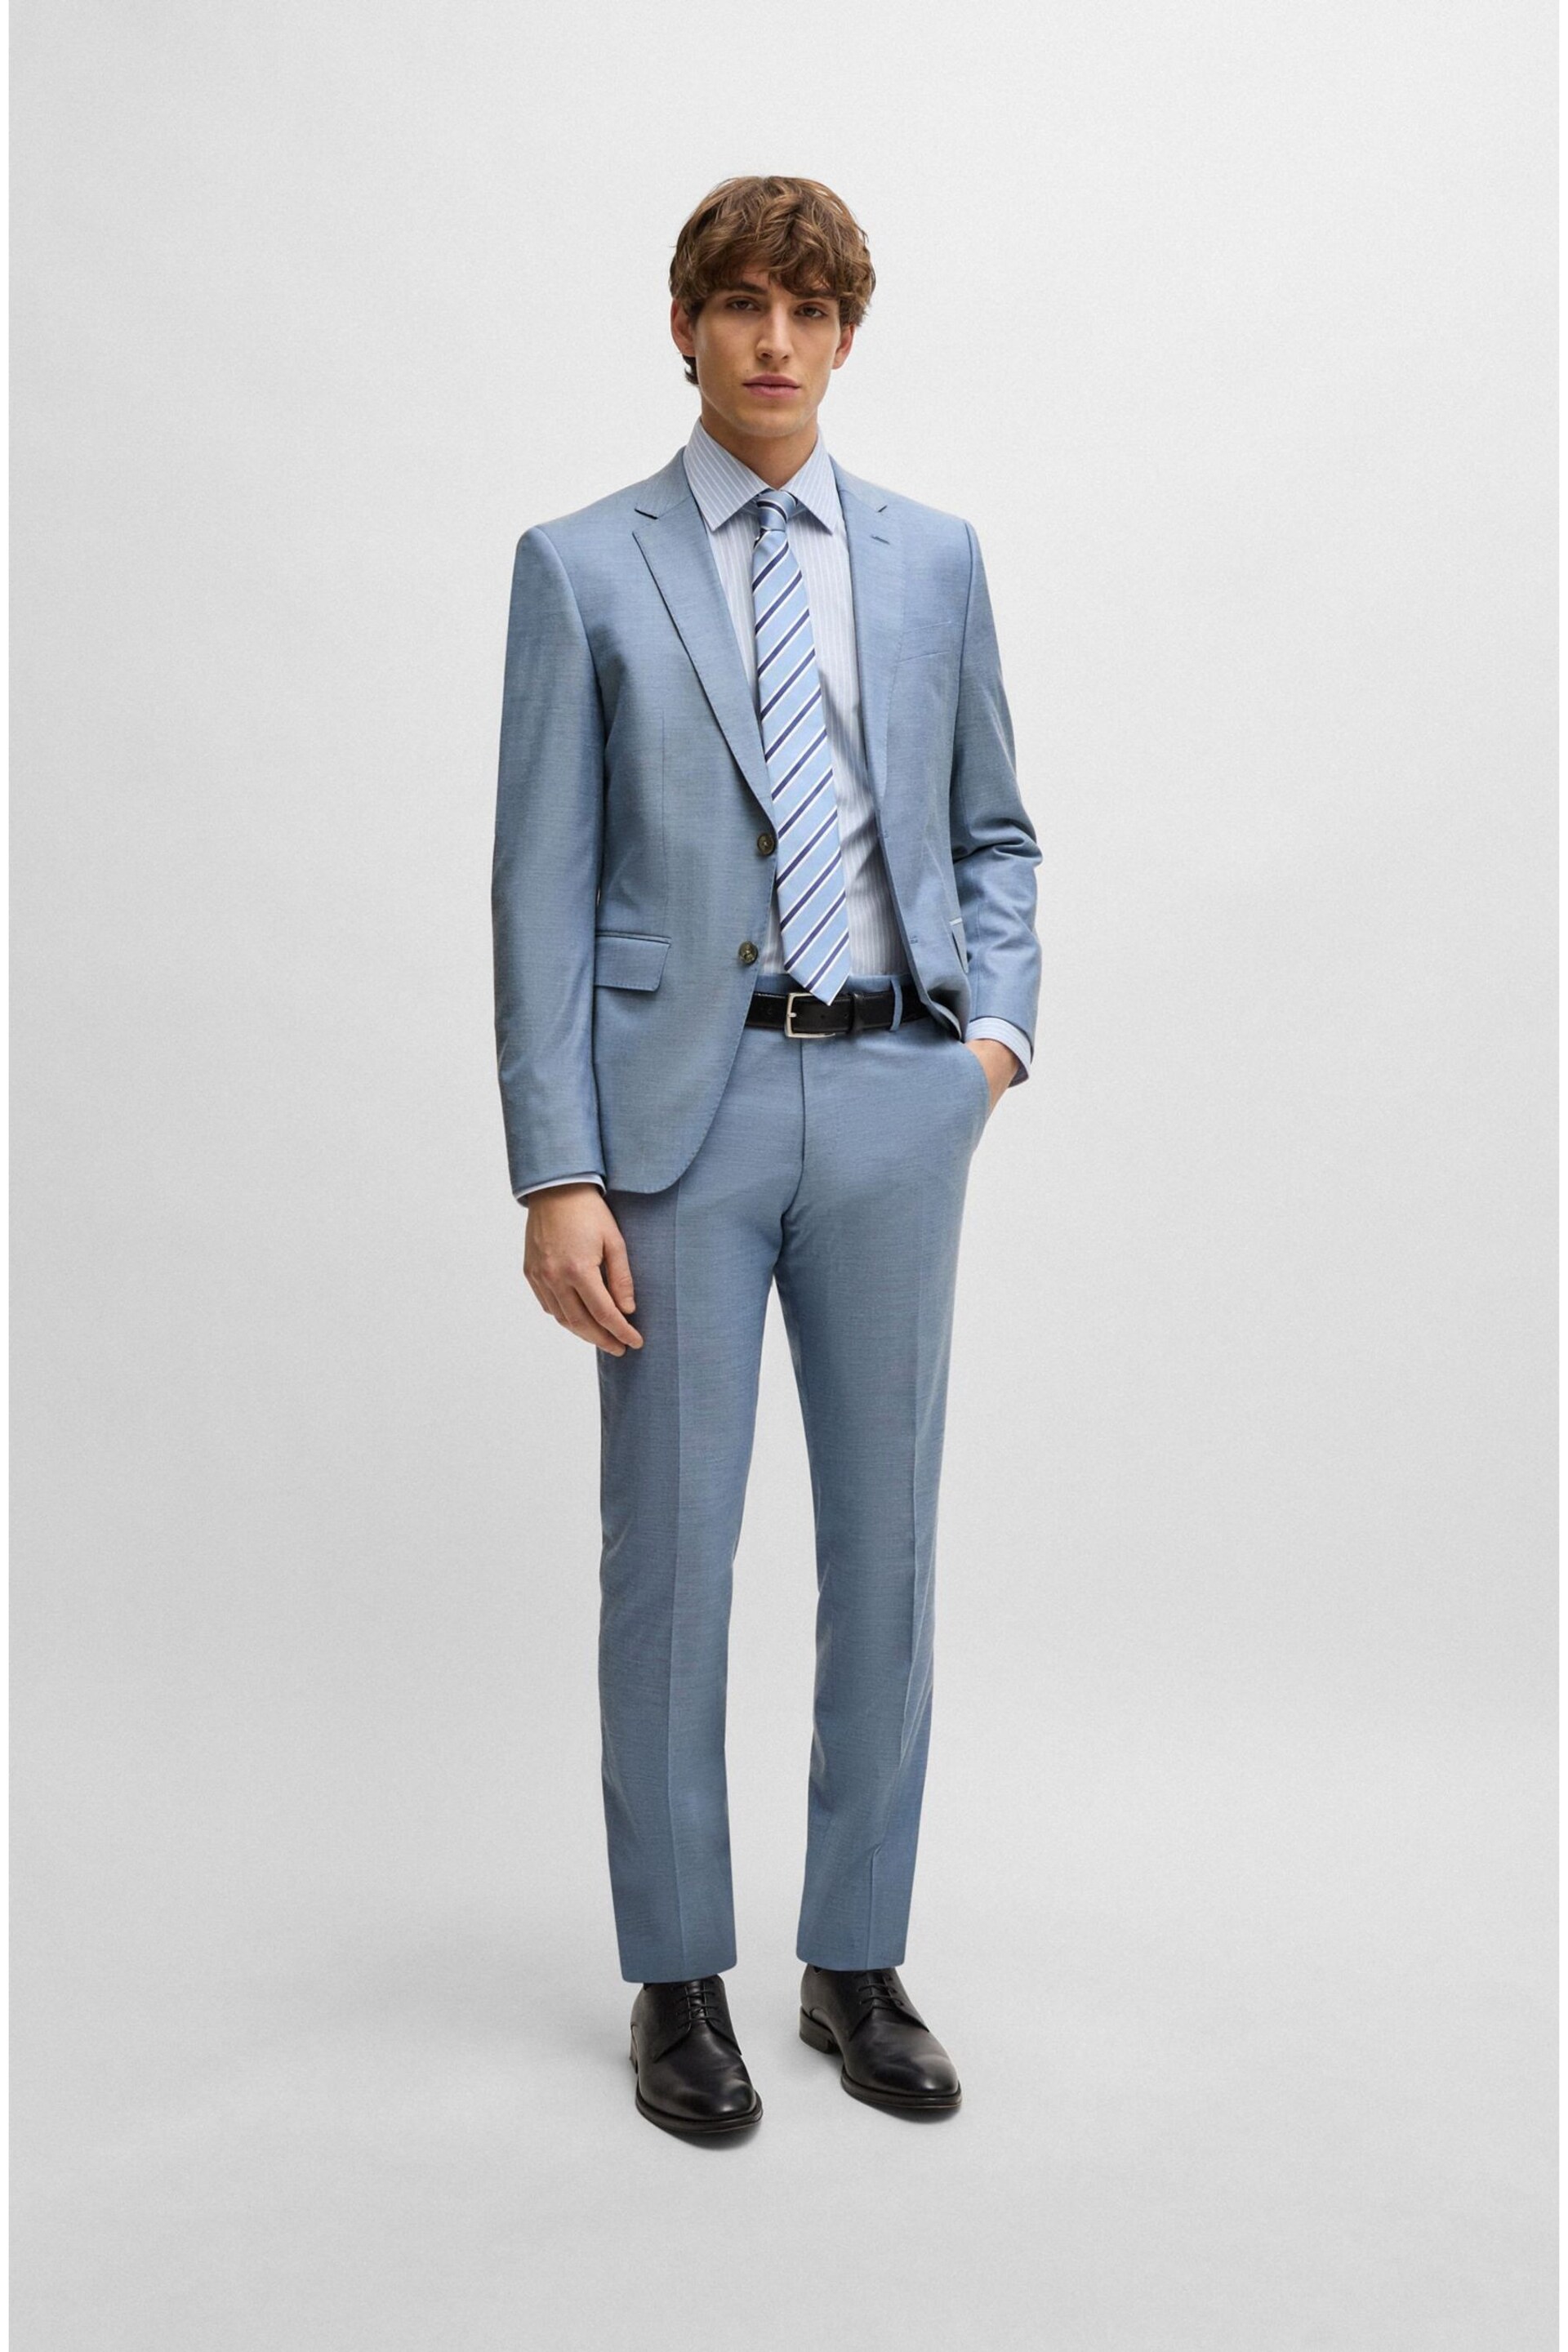 BOSS Blue Slim-Fit Shirt In Striped Easy-Iron Stretch Cotton - Image 3 of 6